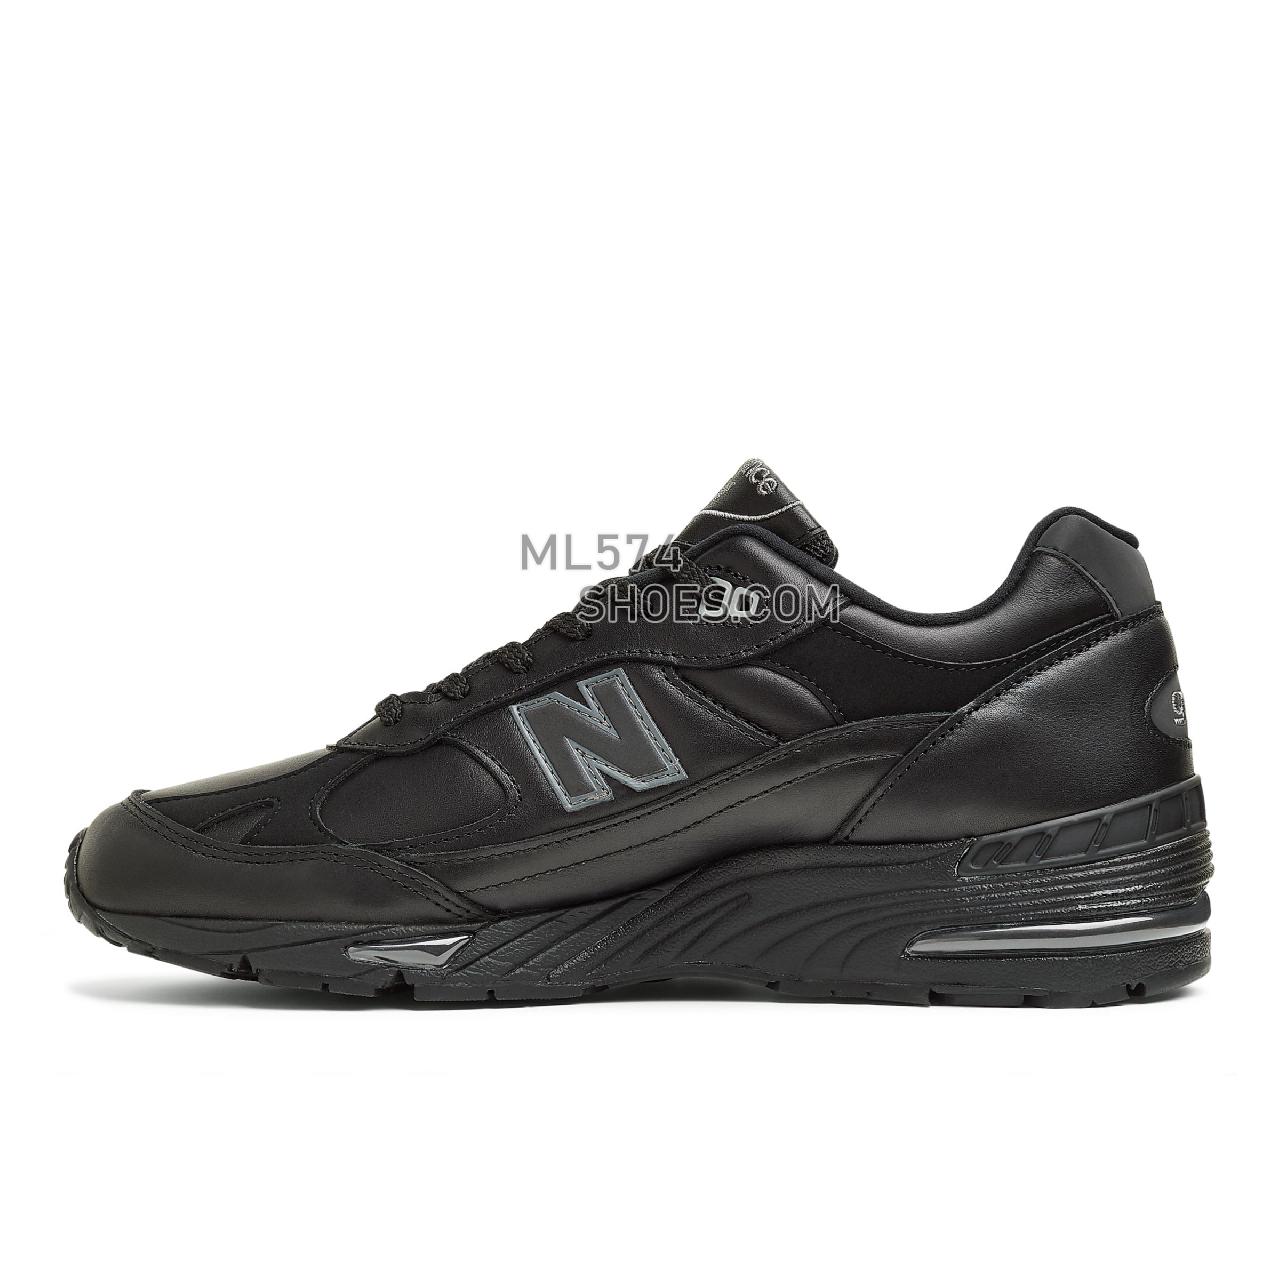 New Balance Made in UK 991 - Men's Made in USA And UK Sneakers - Black with Grey - M991TK